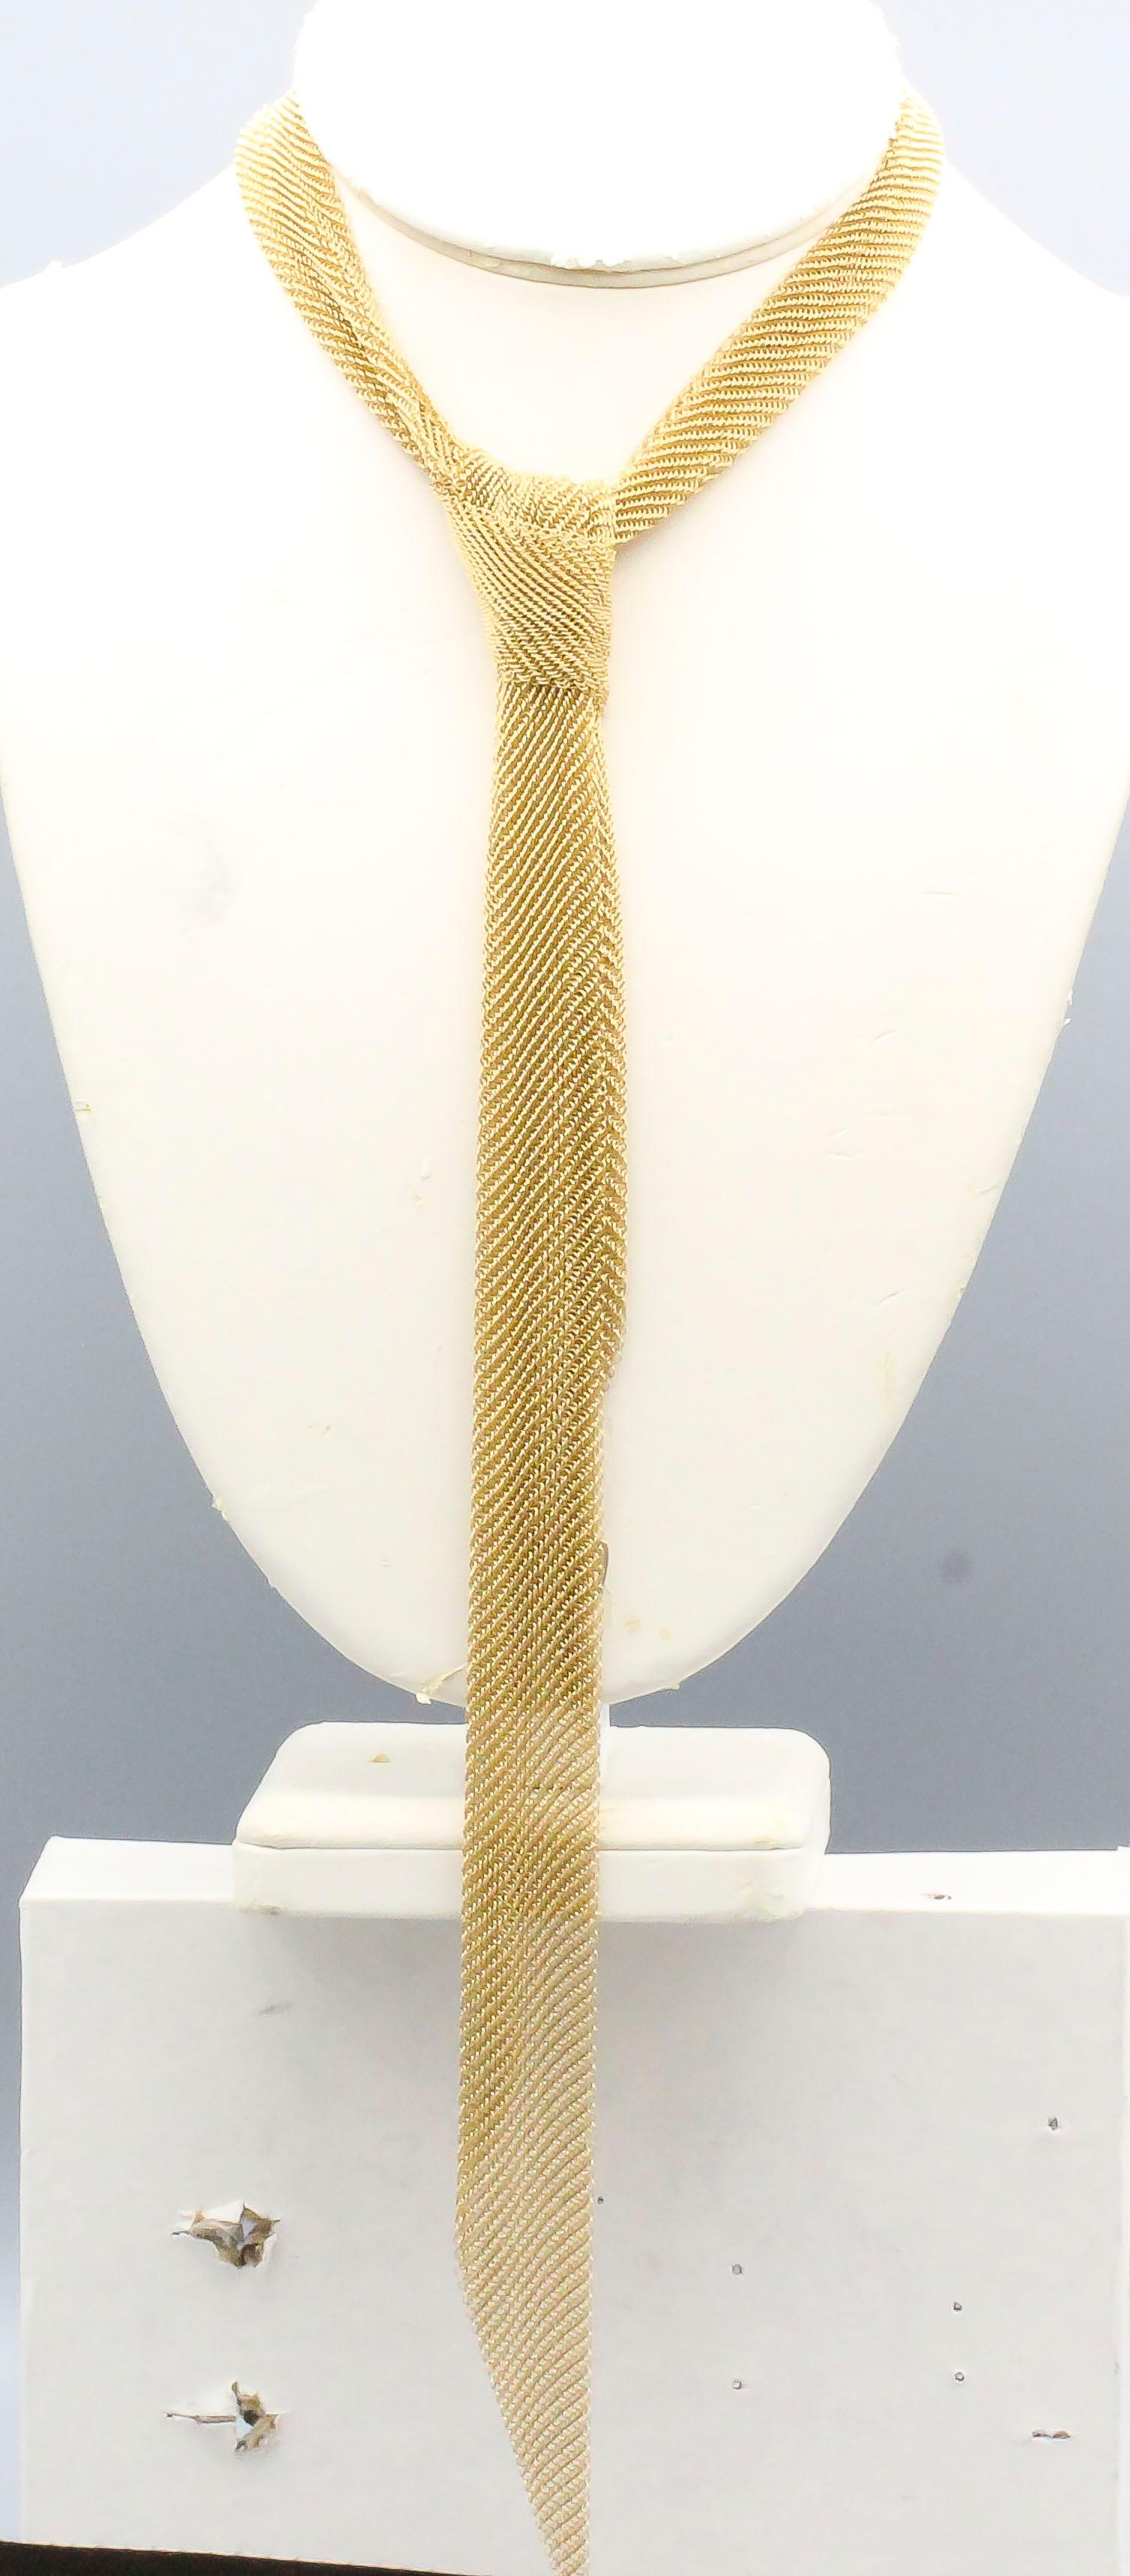 Chic and interesting mesh 18K yellow gold scarf necklace by Tiffany & Co. Peretti. Intricate mesh design, very light and delicate. Can be used in a number of way, even as a chic skinny tie as shown in one of the pictures.  This is the smaller of the